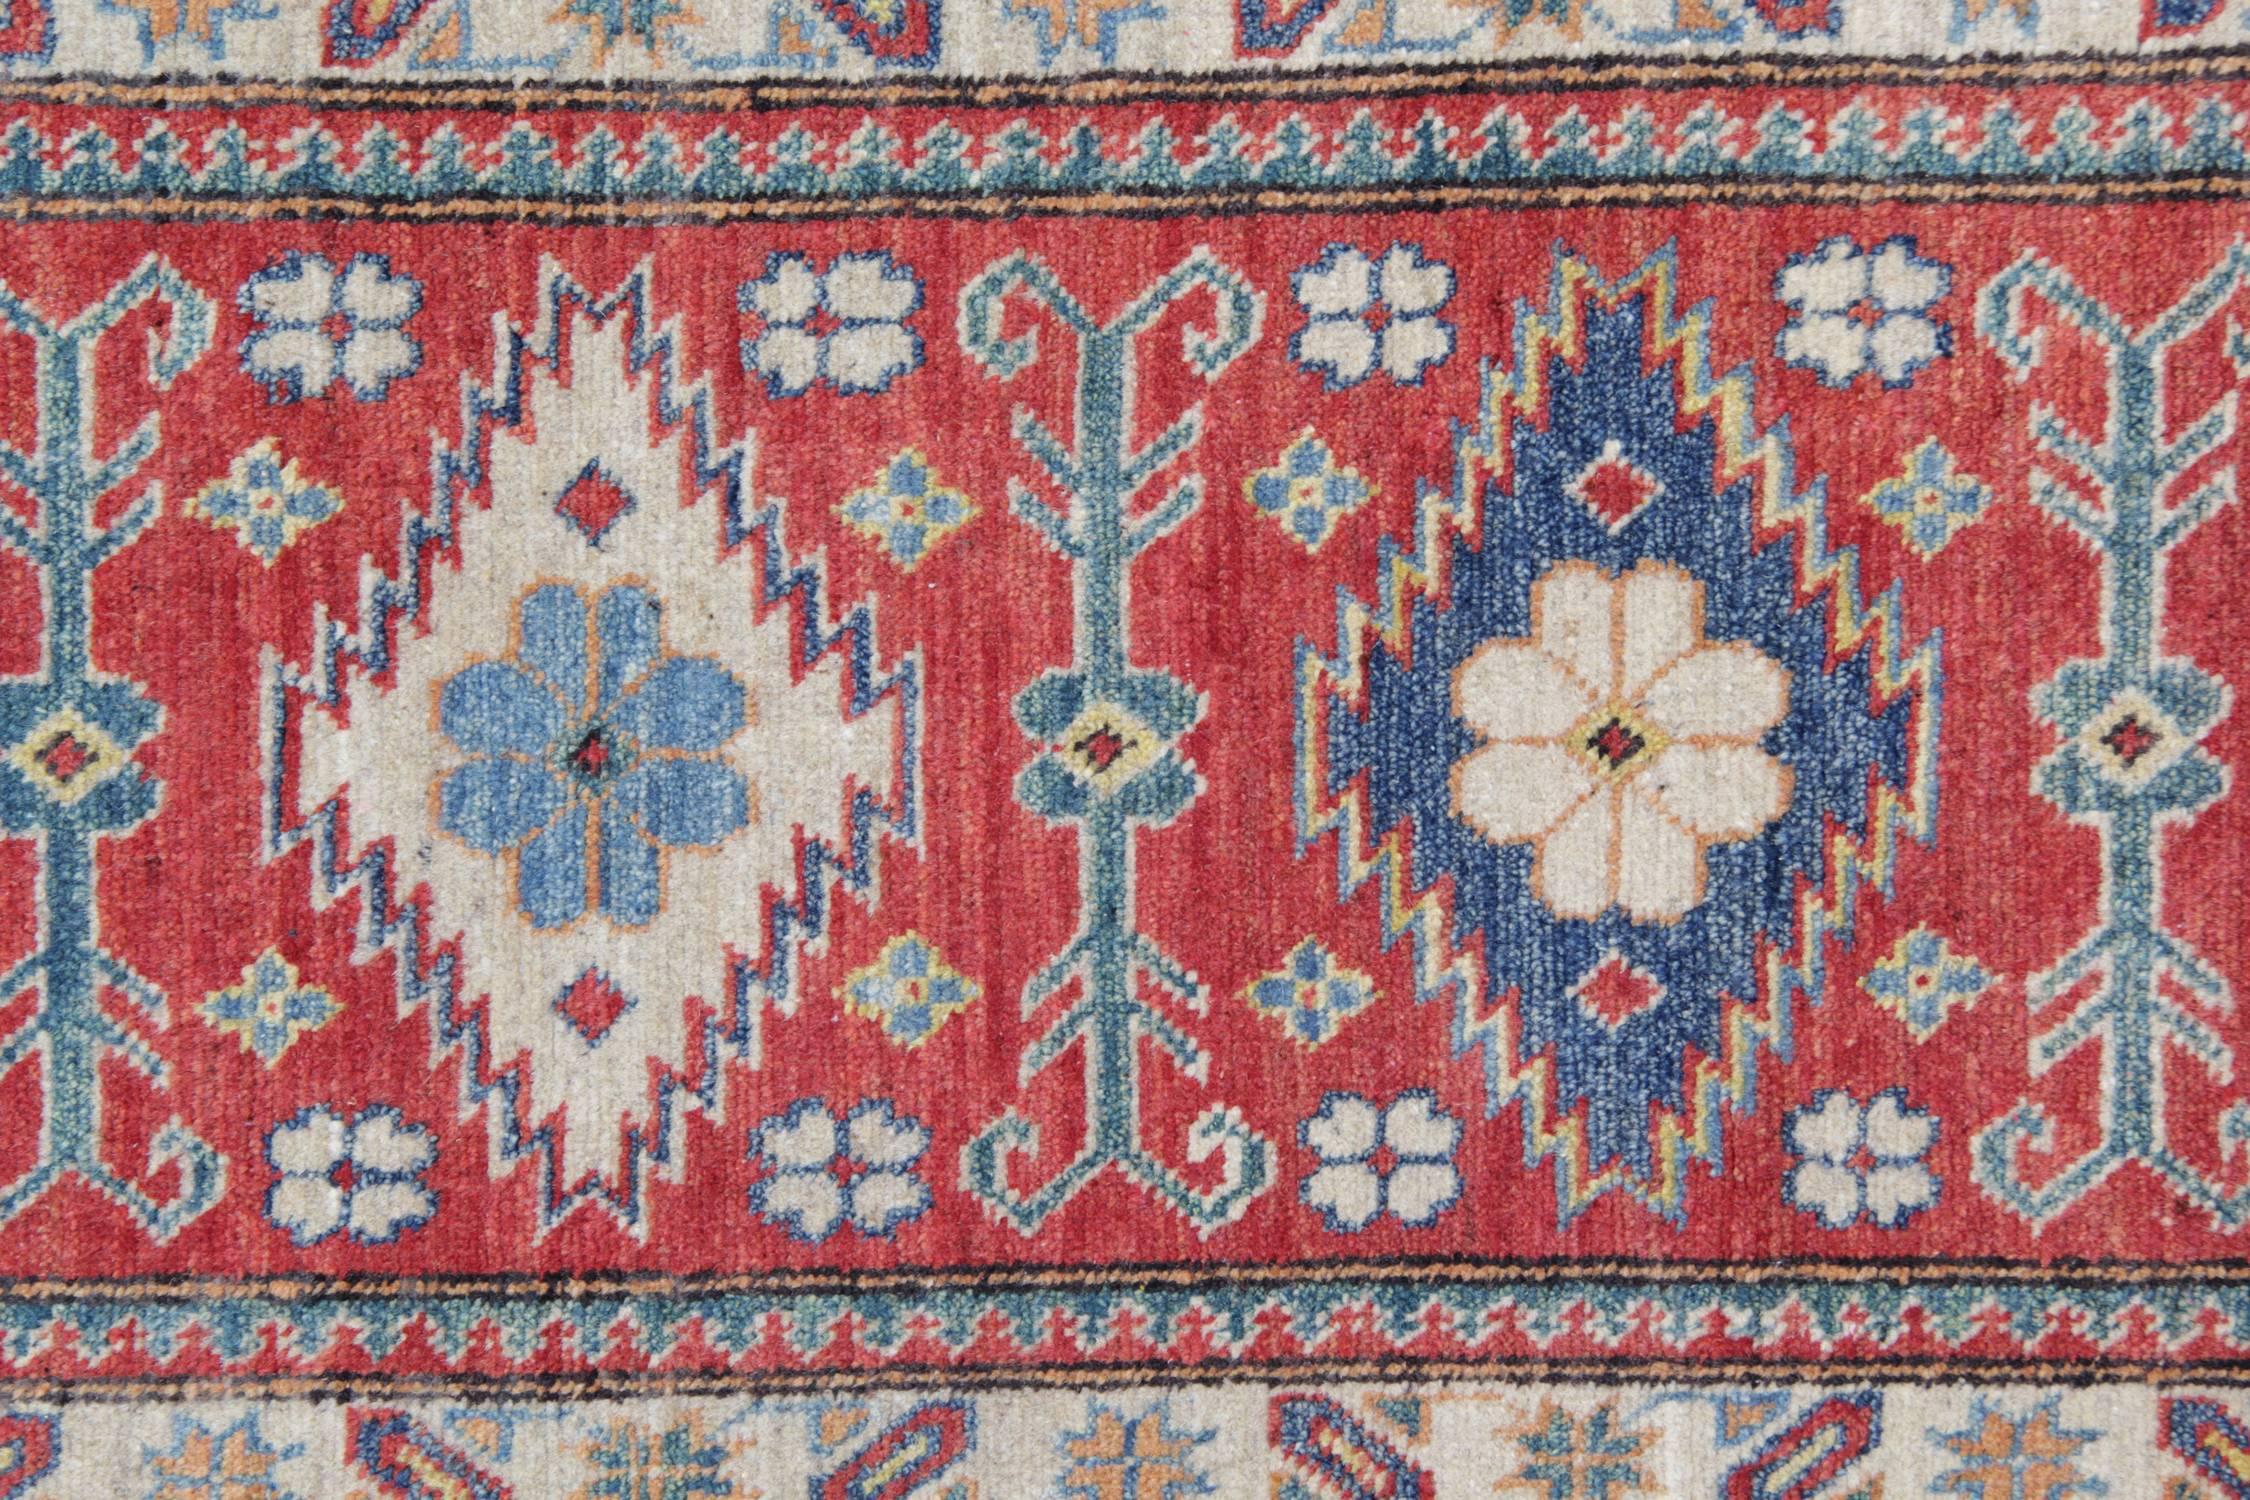 Hand-Crafted Handmade Rug New Traditional Rugs, Carpet Runners from Kazak Style Rugs